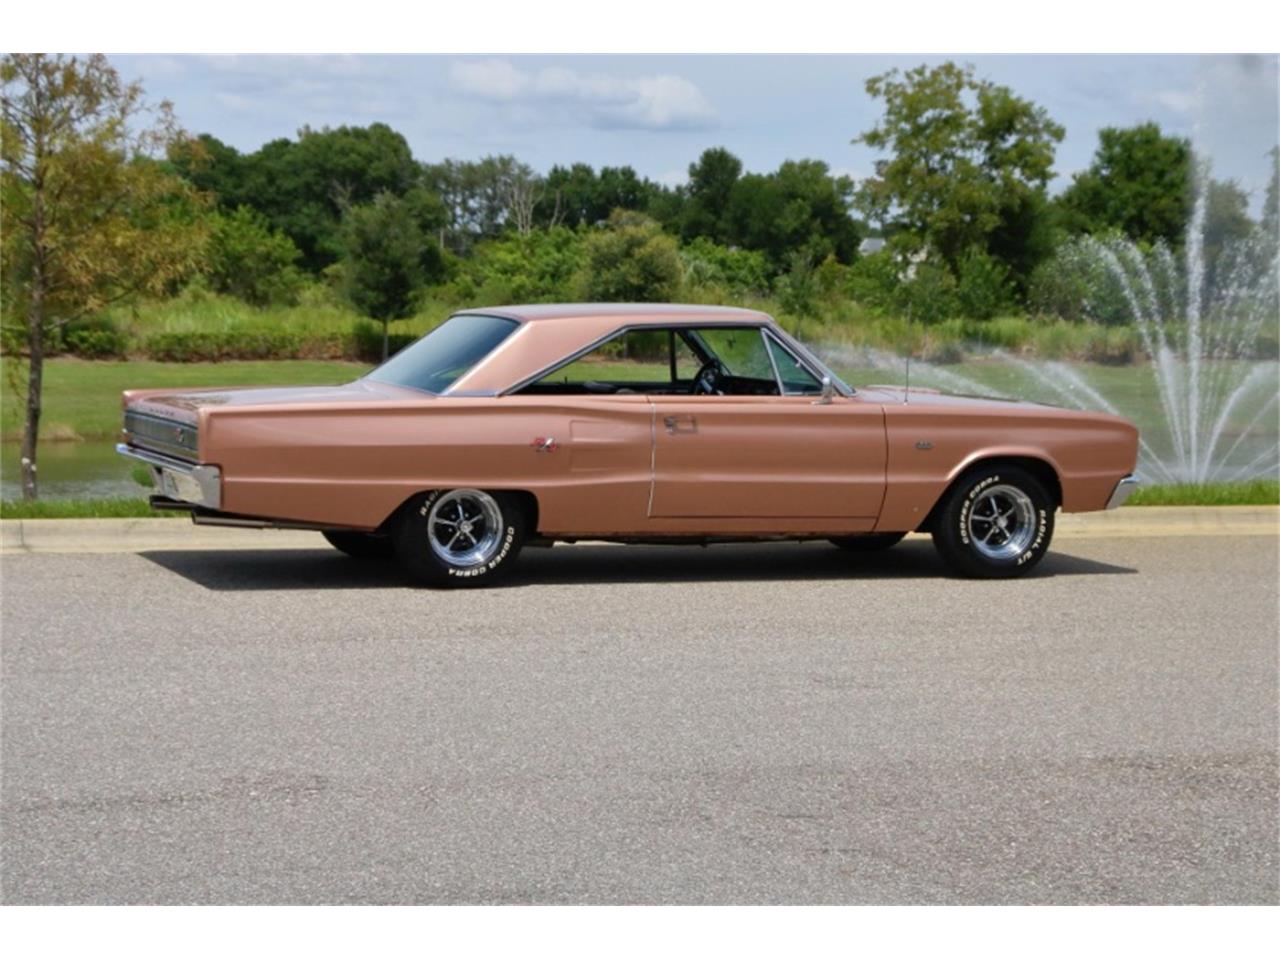 For Sale: 1967 Dodge Coronet in Hobart, Indiana for sale in Hobart, IN